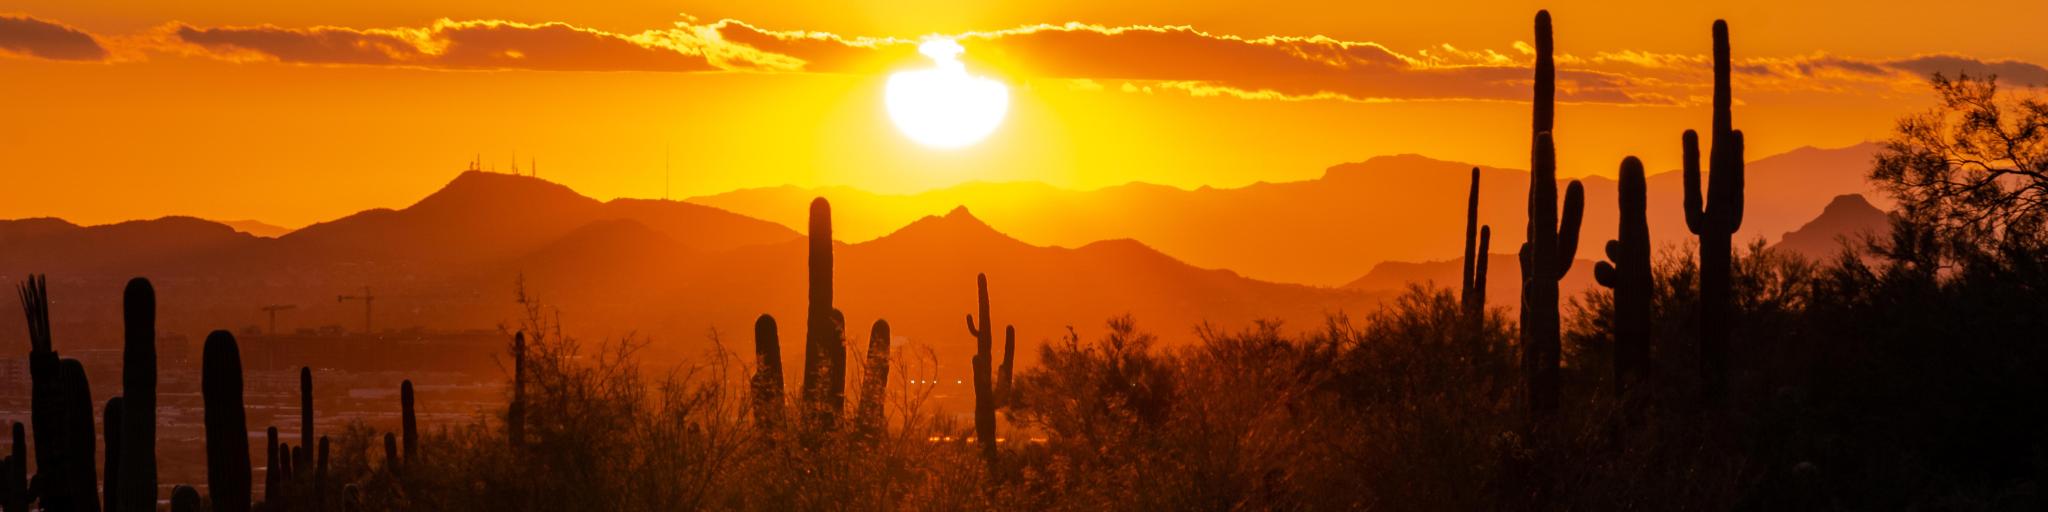 Tucson, Arizona, USA with a sunset over saguaro cactus seen as a silhouette against the sky.